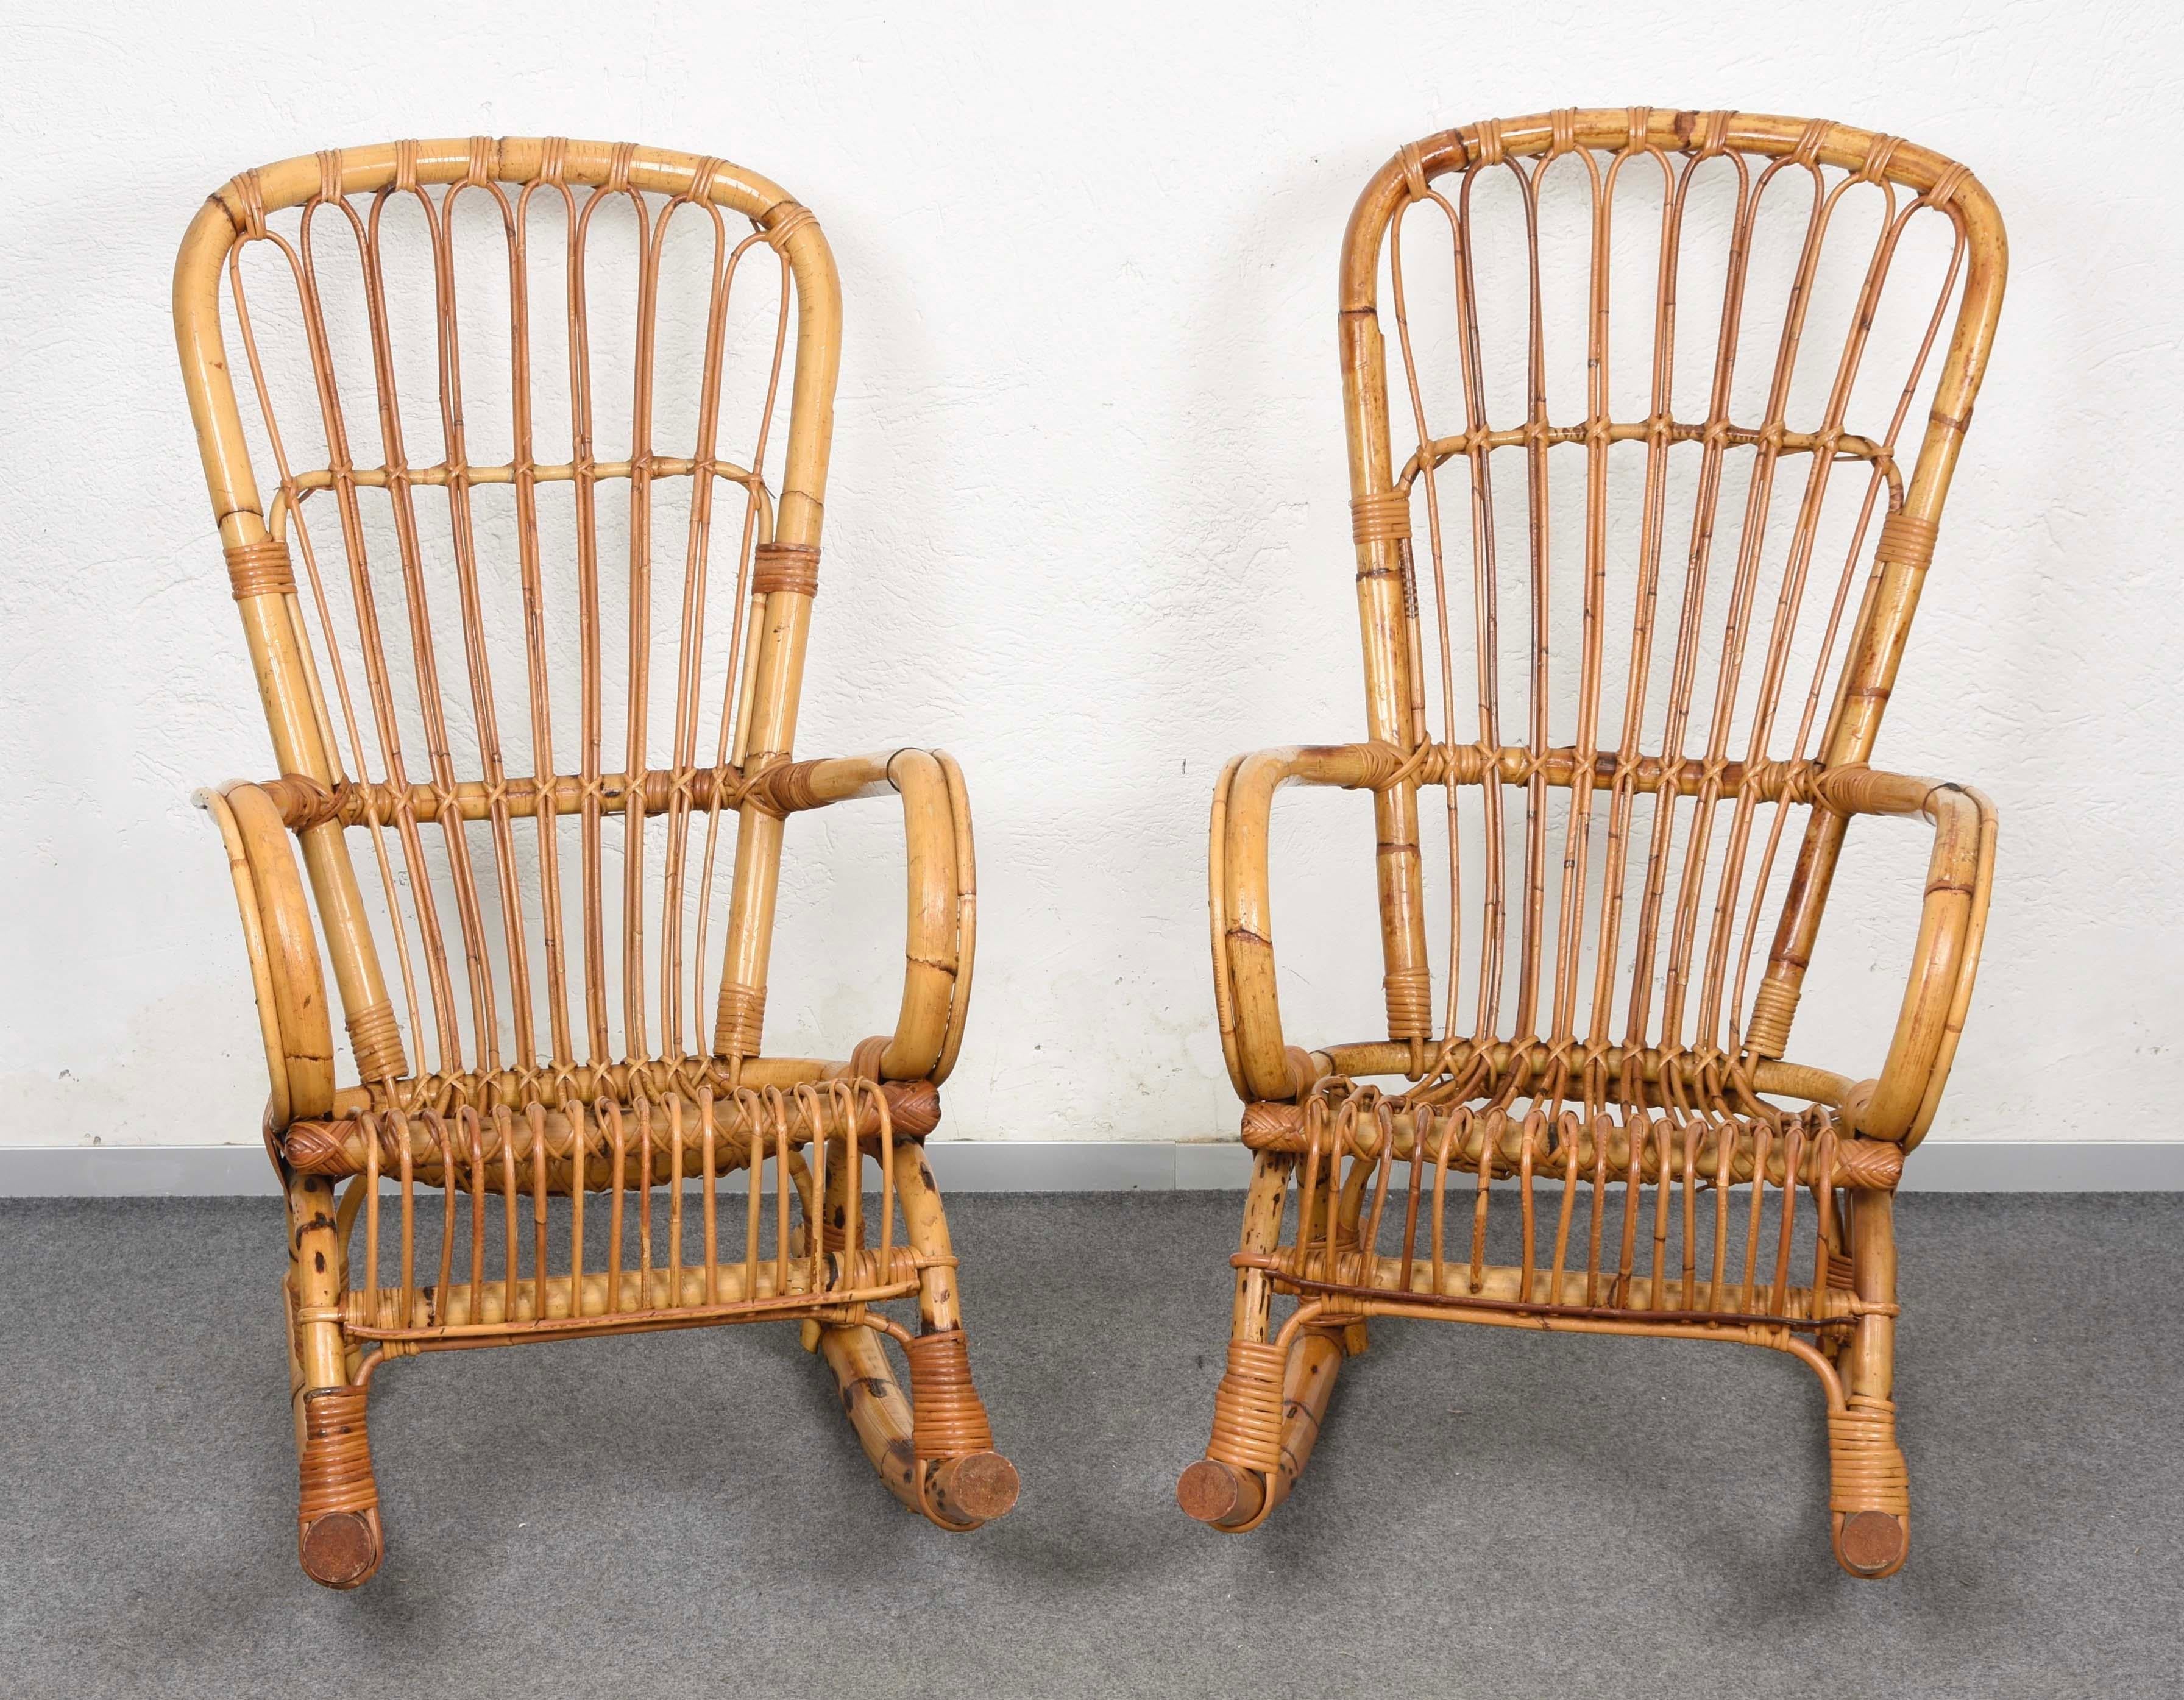 Pair of Midcentury Cote d'Azur Rattan and Bamboo Italian Rocking Chairs, 1960s For Sale 2